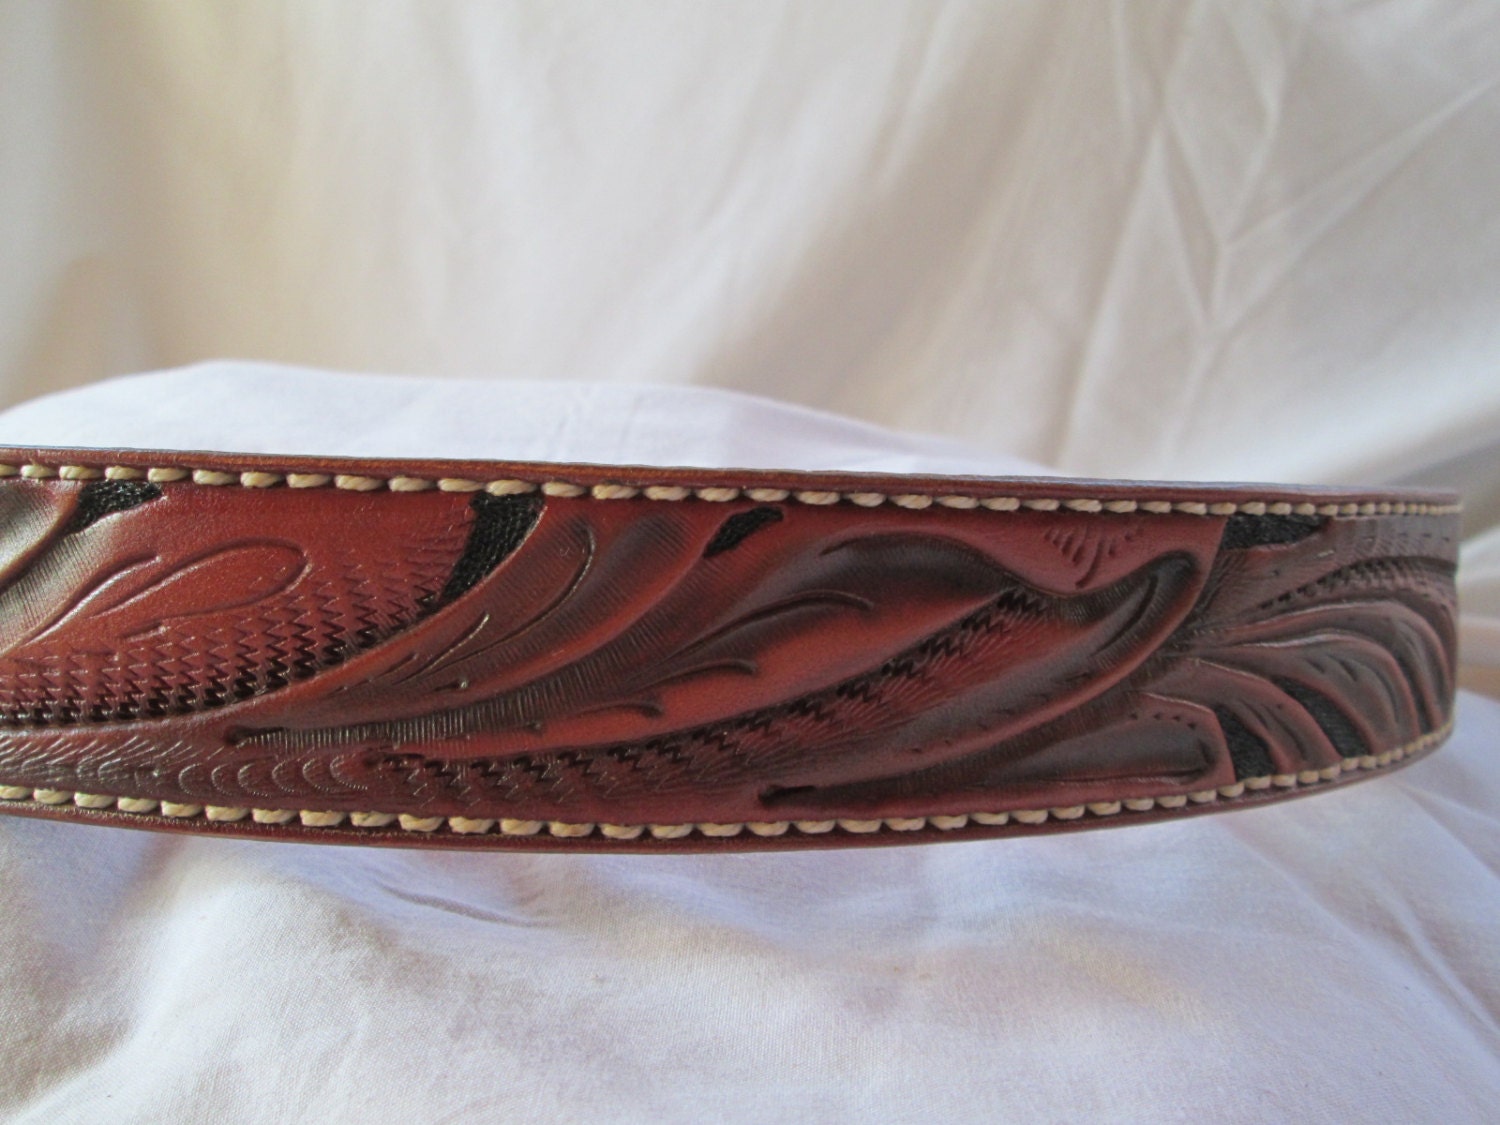 Luxury tooled leather belt 1 by AcrossLeather on Etsy